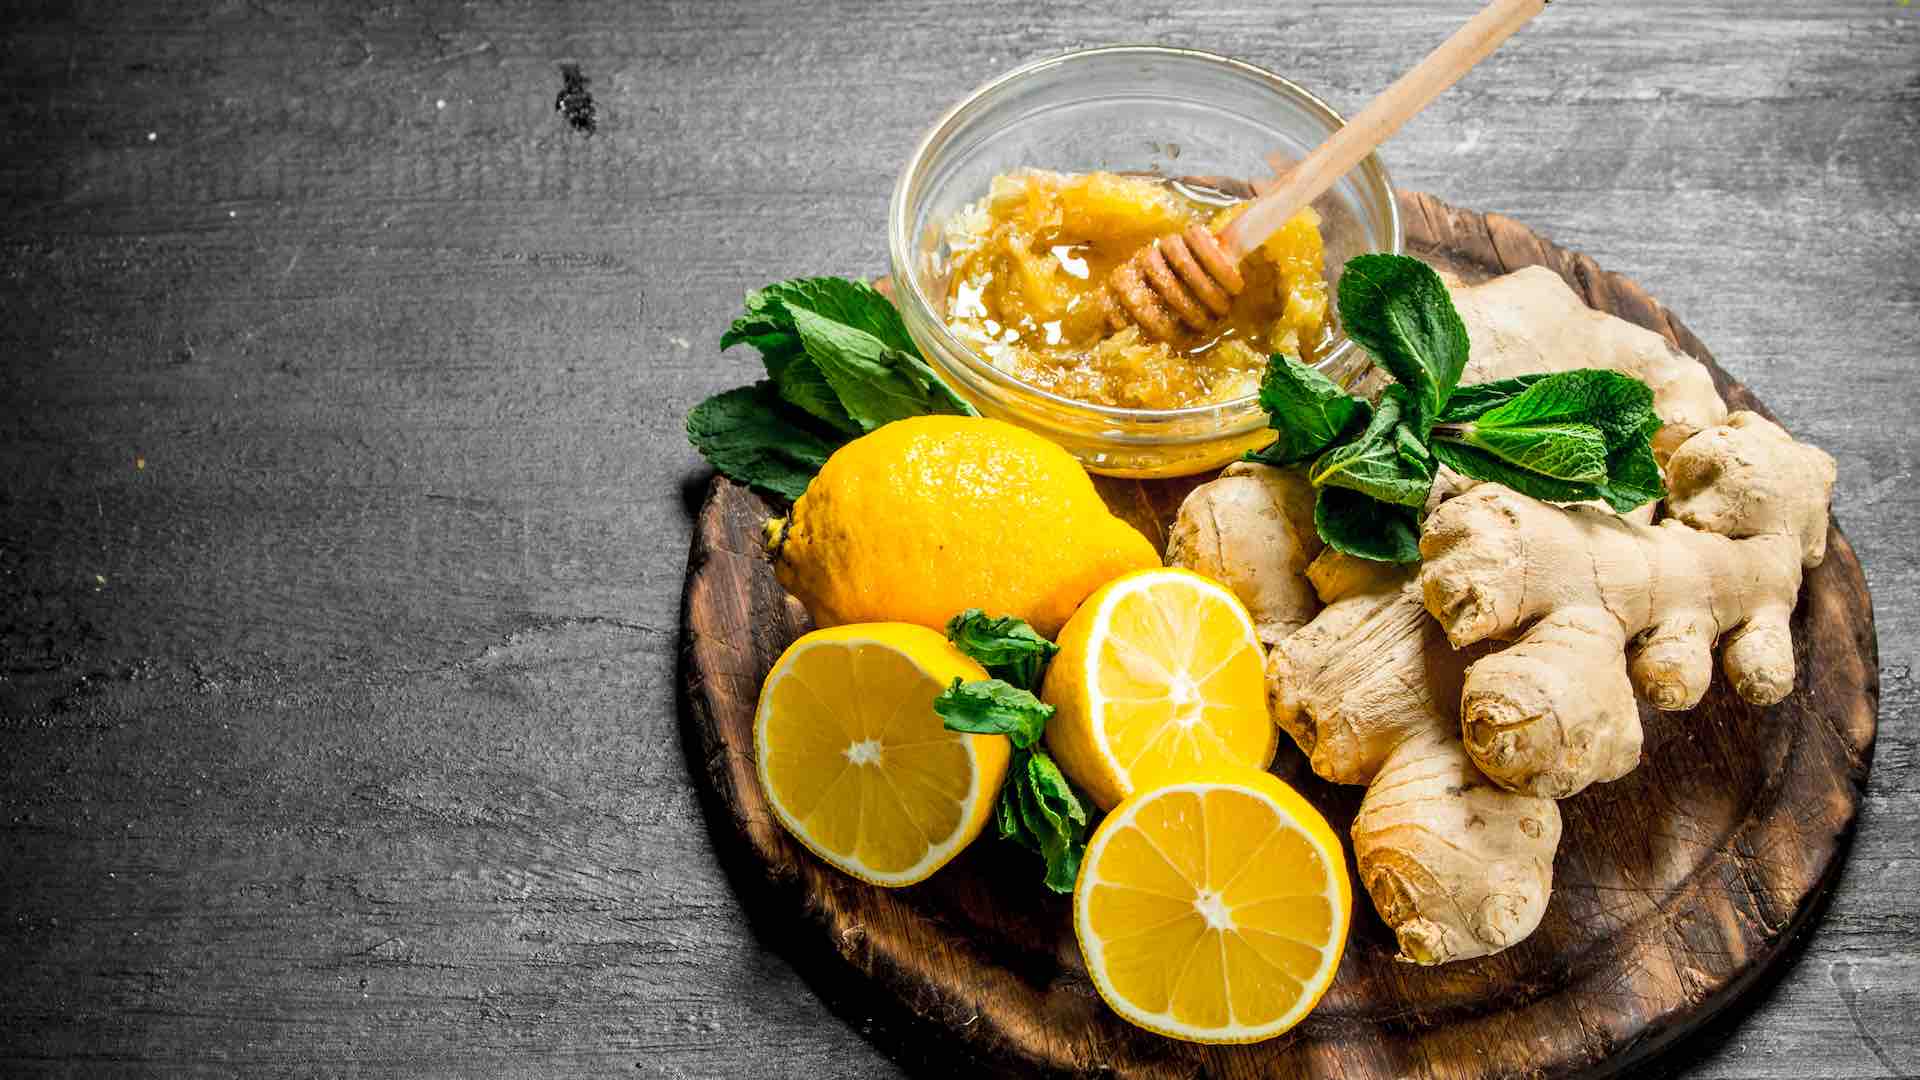 Ginger emerges as leading spice for blood sugar management